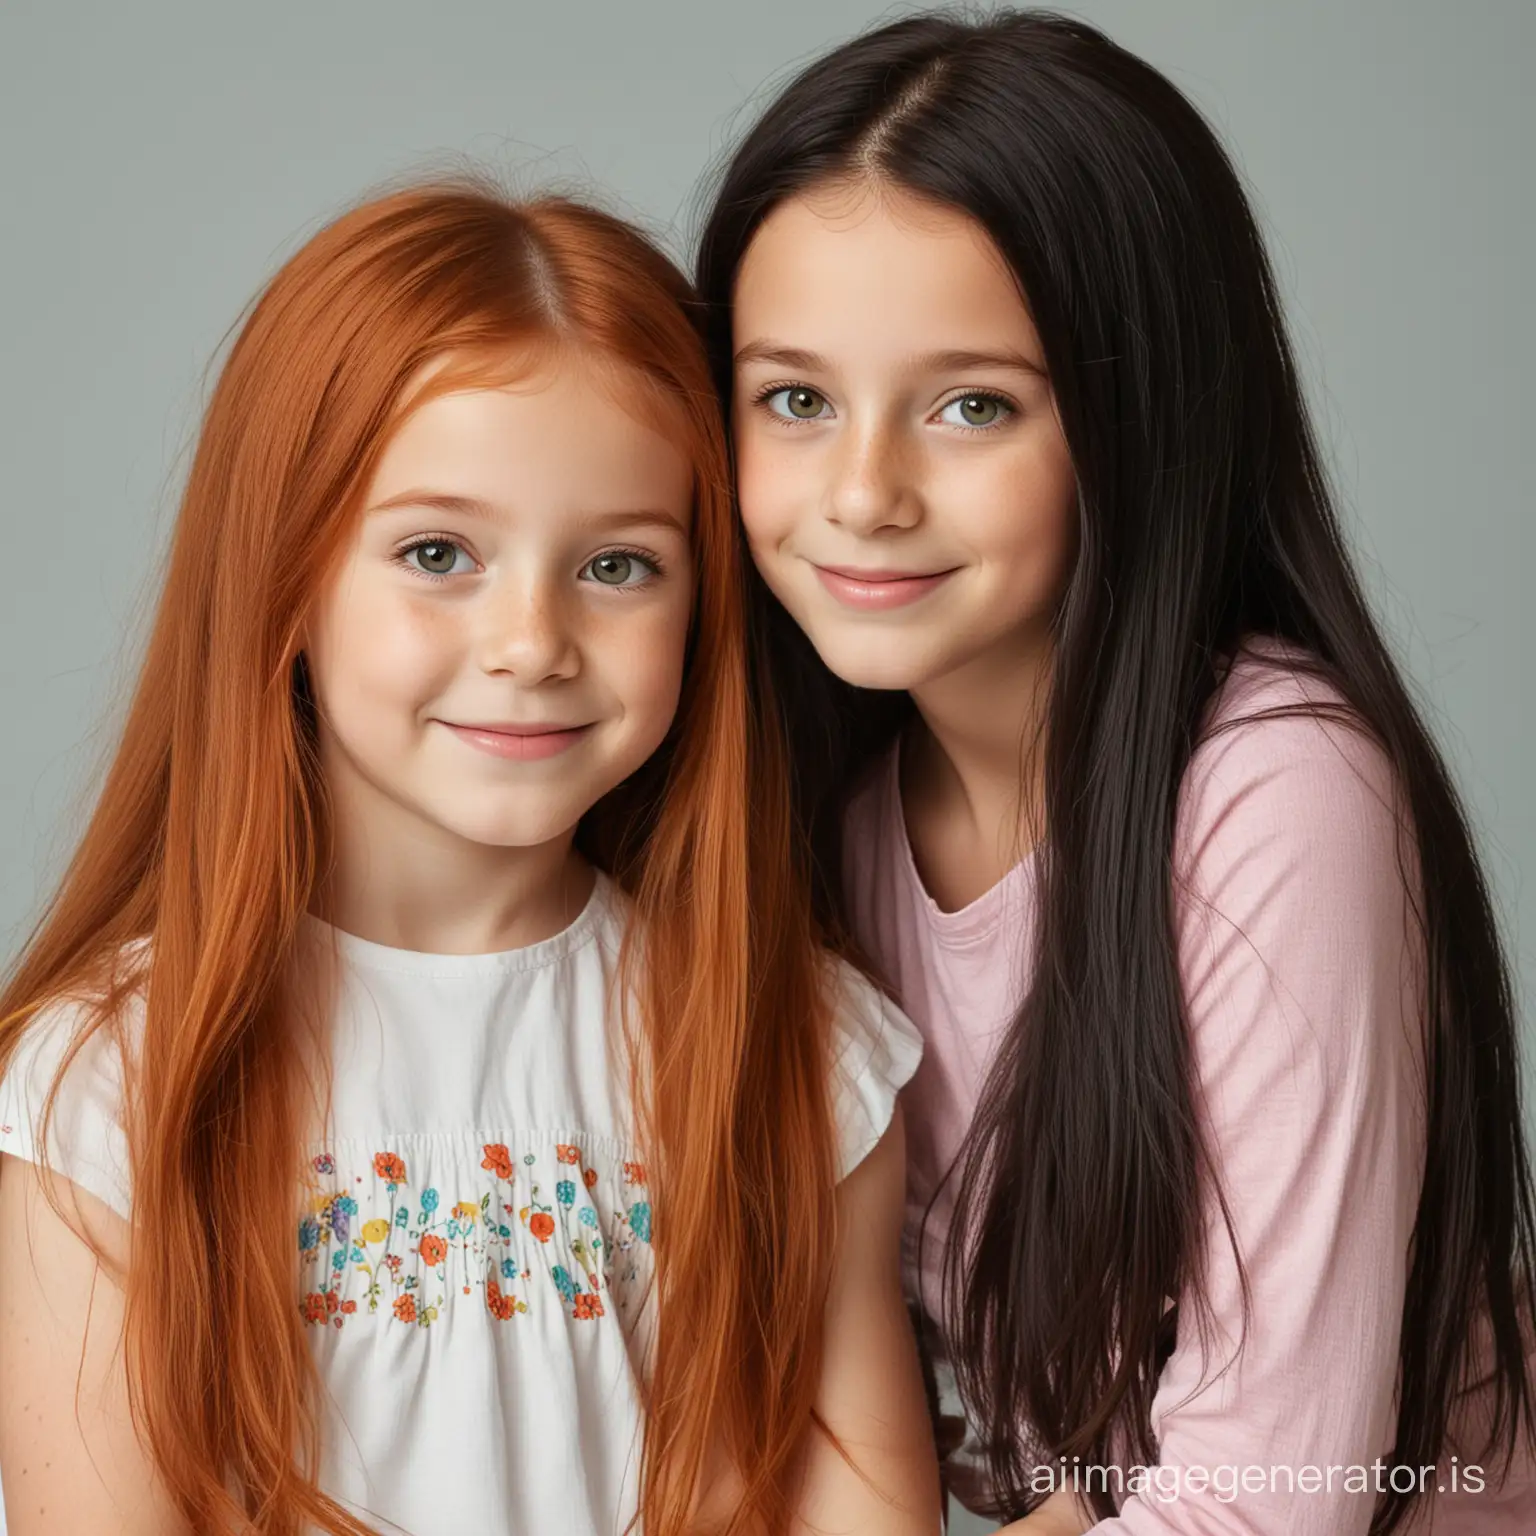 A 5-year-old girl with long red hair and her 8-year-old sister with black hair